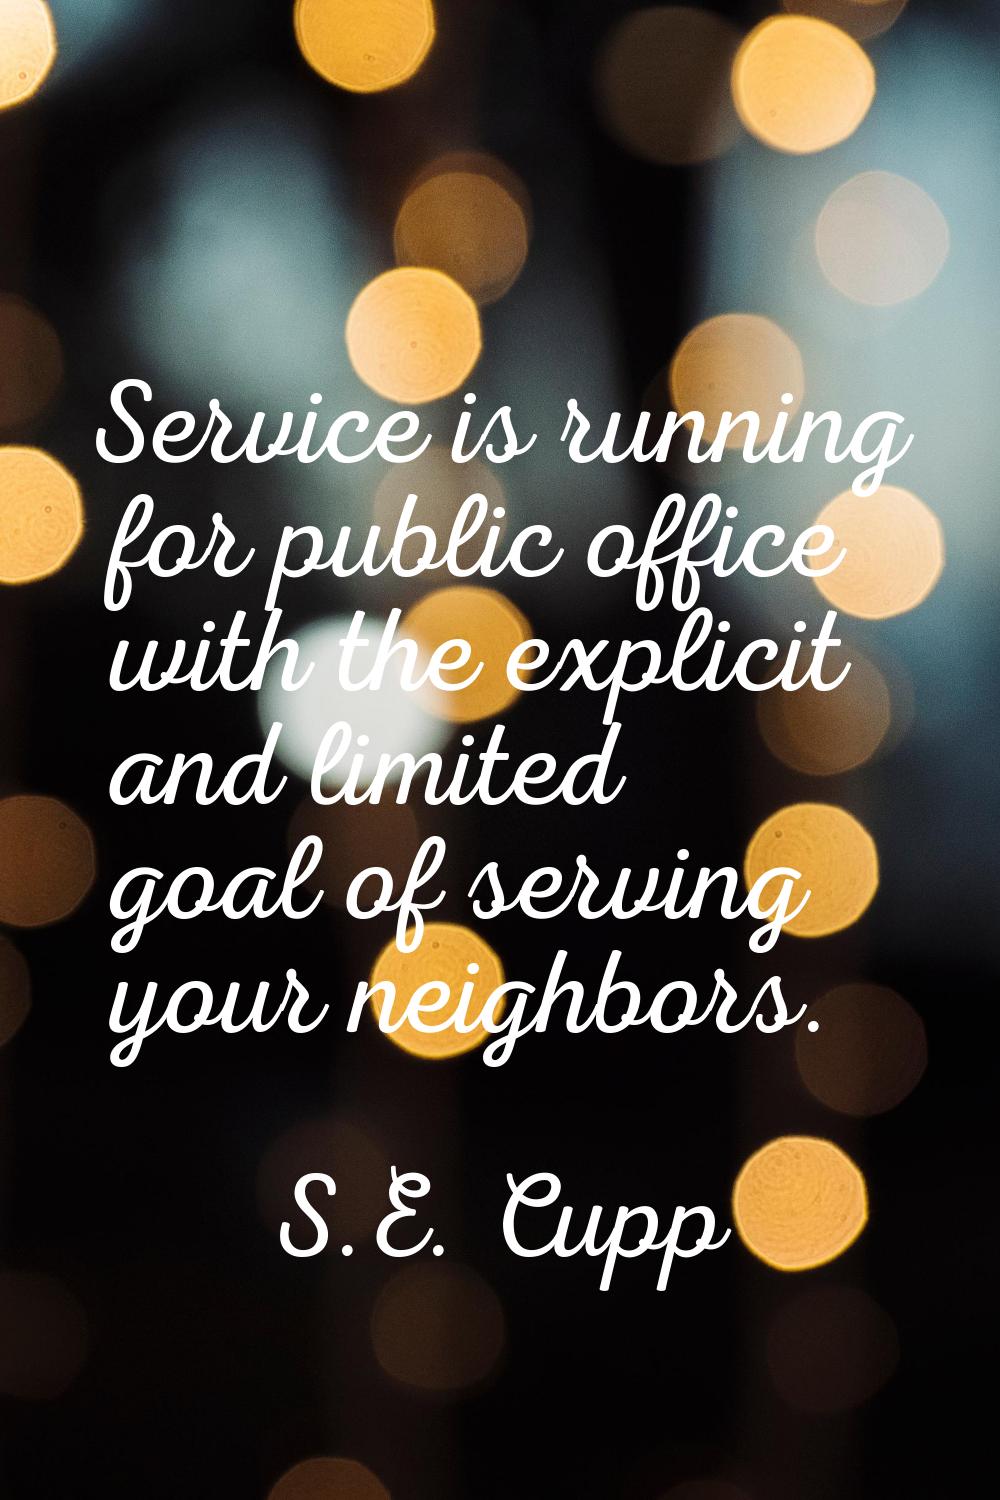 Service is running for public office with the explicit and limited goal of serving your neighbors.